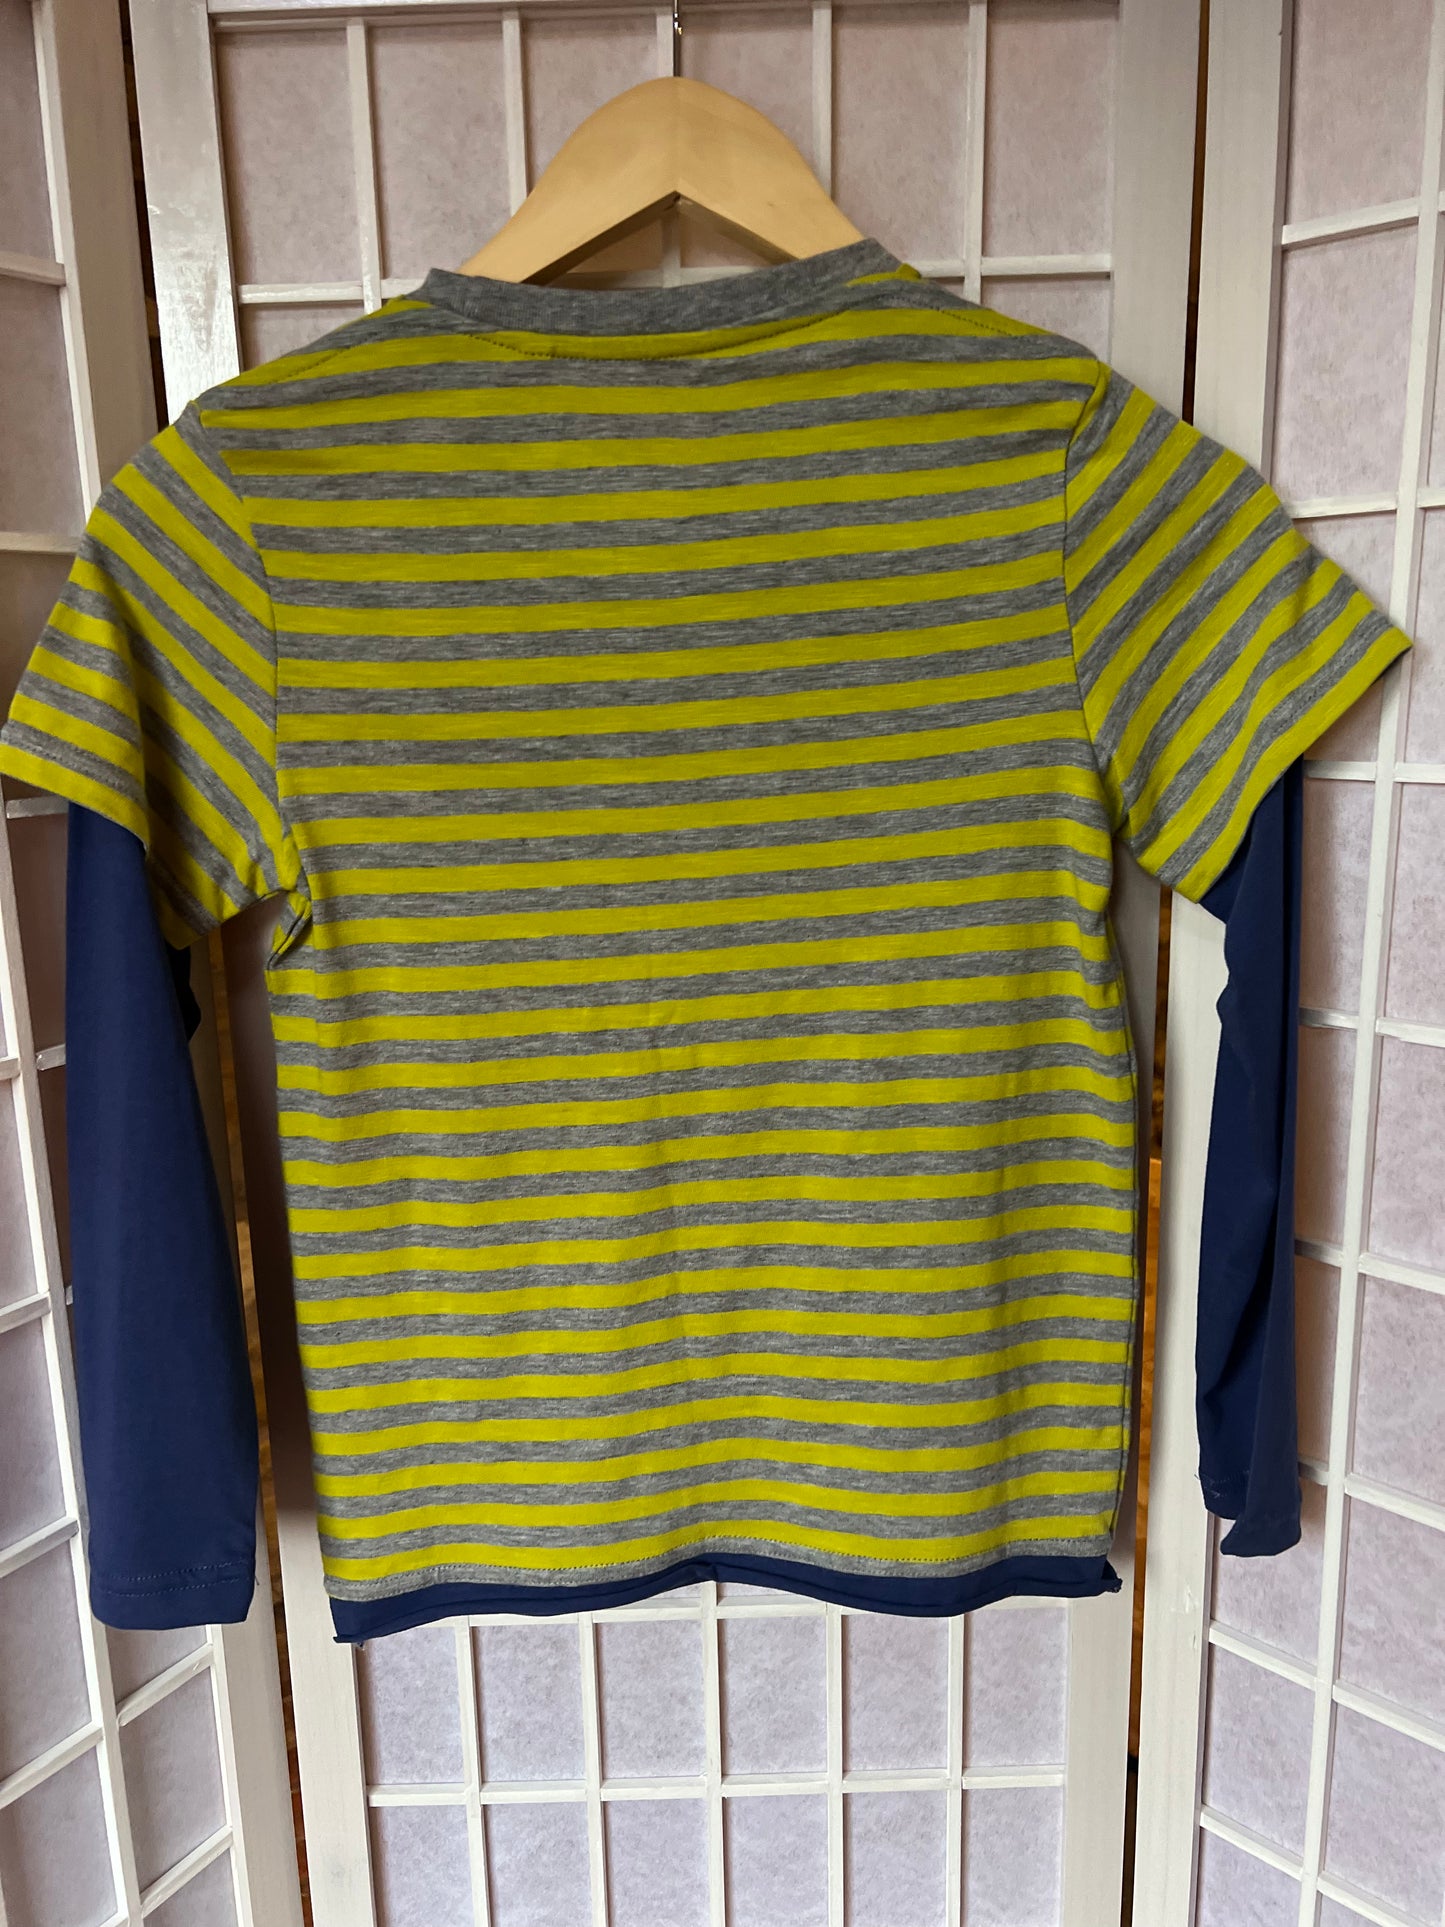 Boden striped long sleeve top Age 7-8